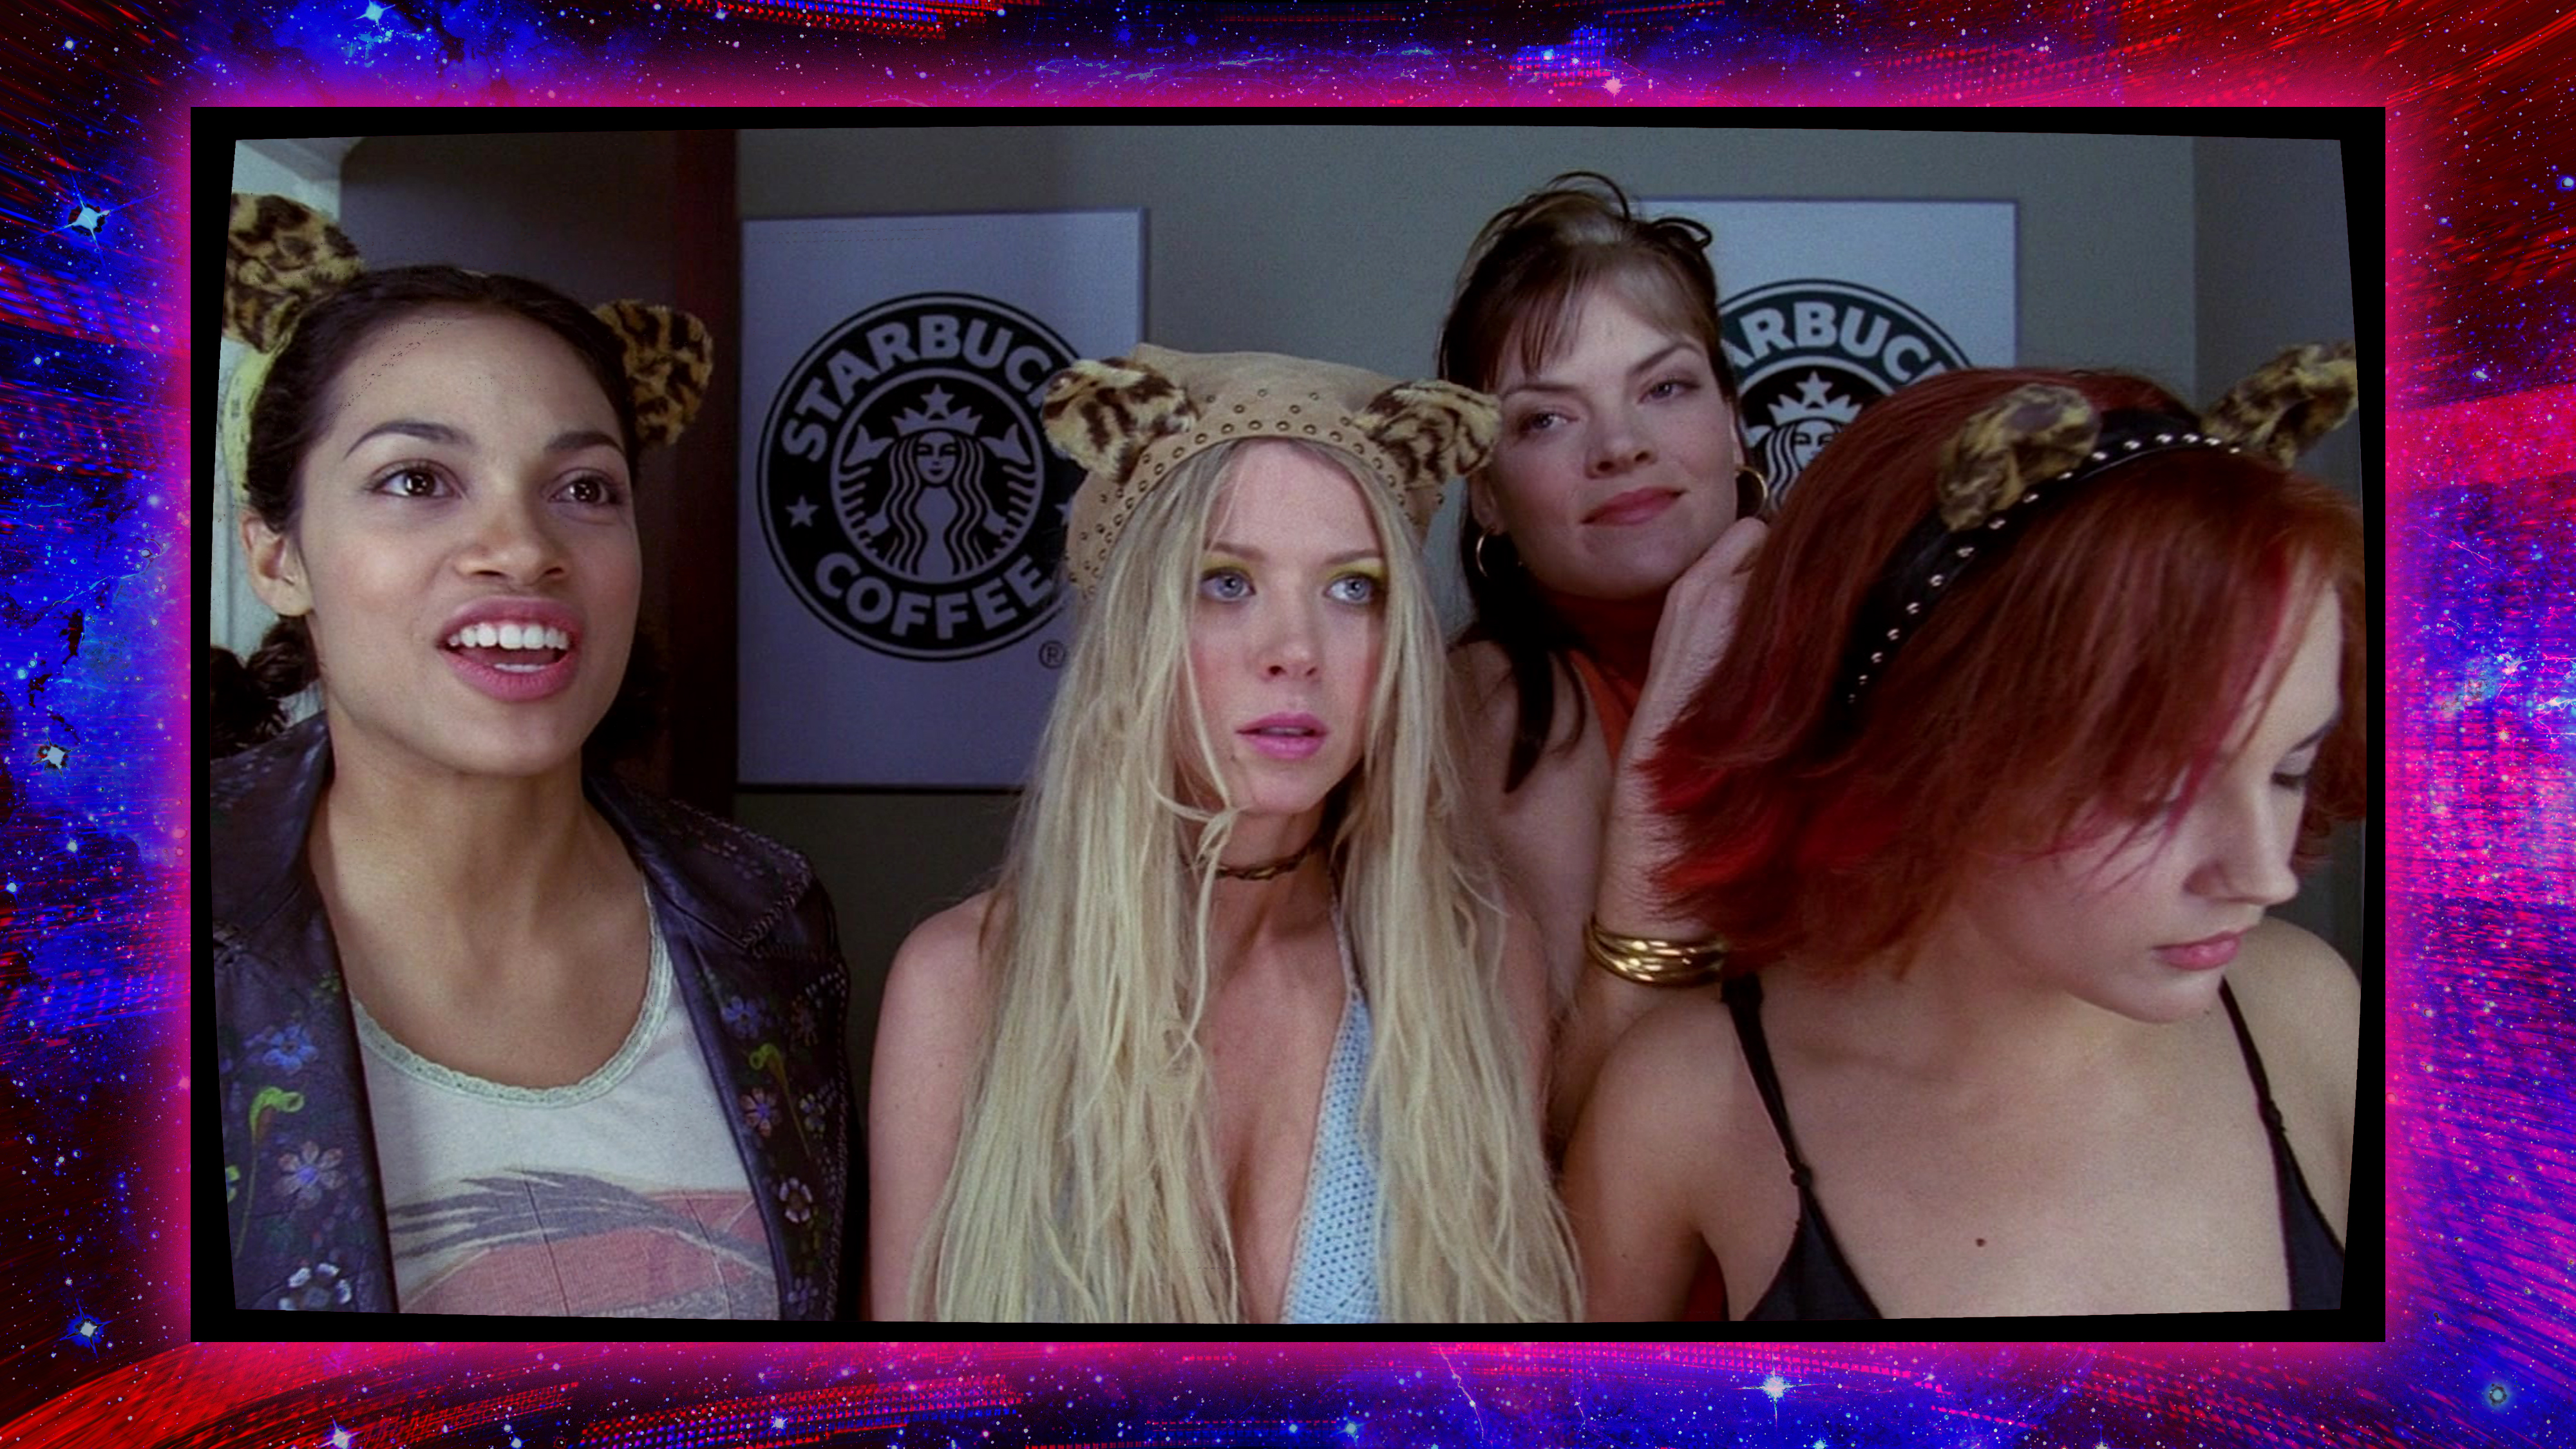 Image of the four women from the Josie and the Pussycats movie on a vibrant background